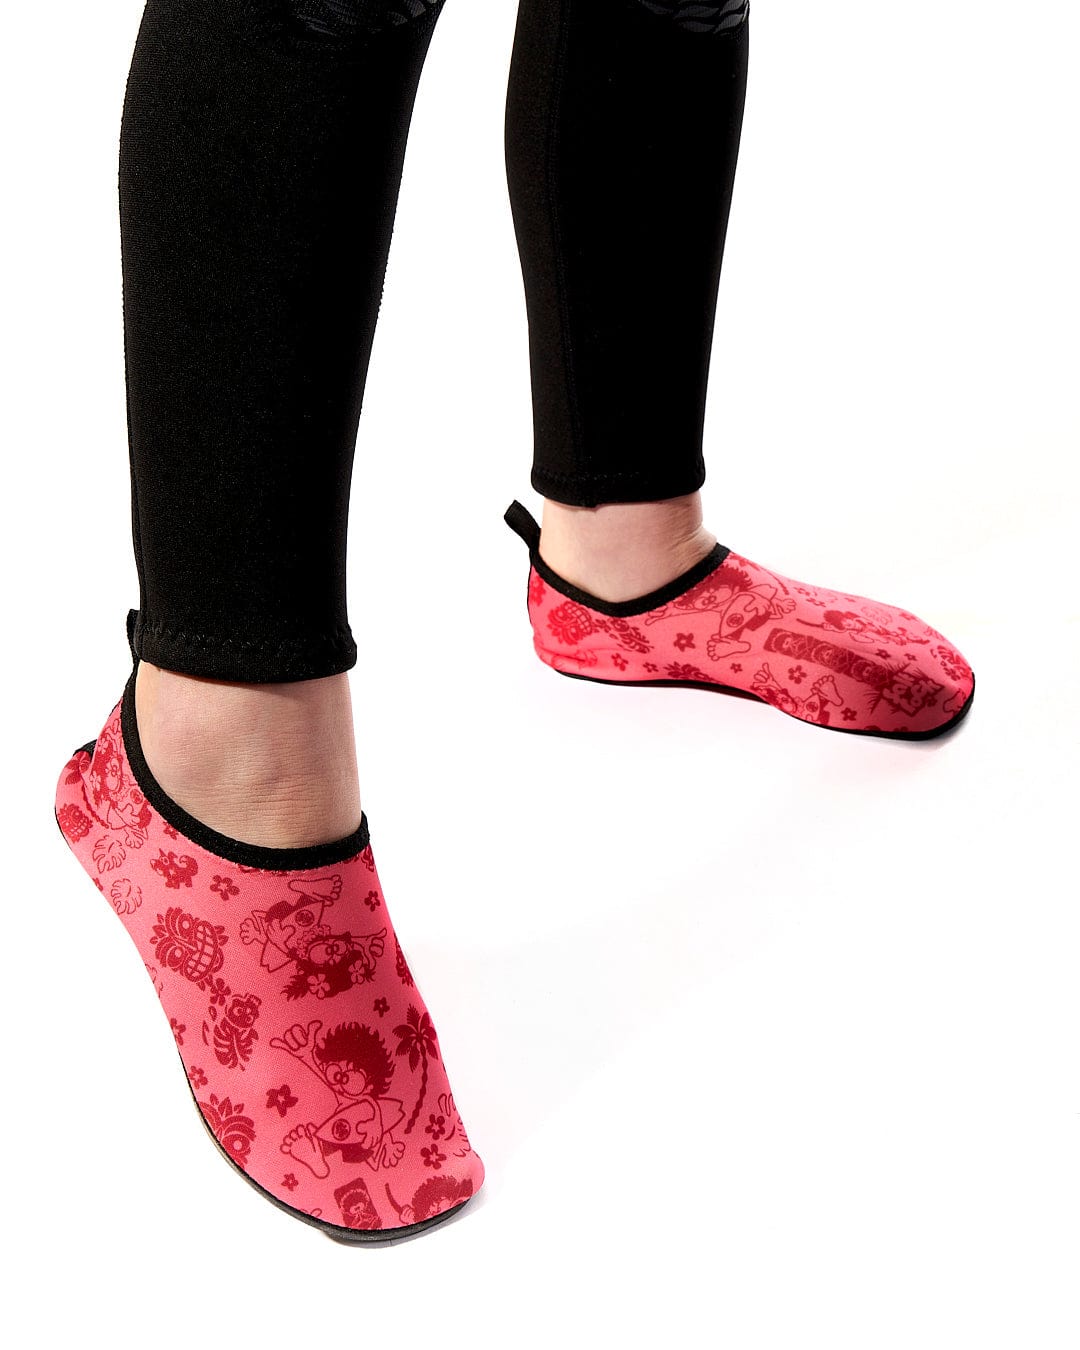 A woman wearing a pair of Tiki Tok - Kids Aqua Shoe - Red slippers by Saltrock.